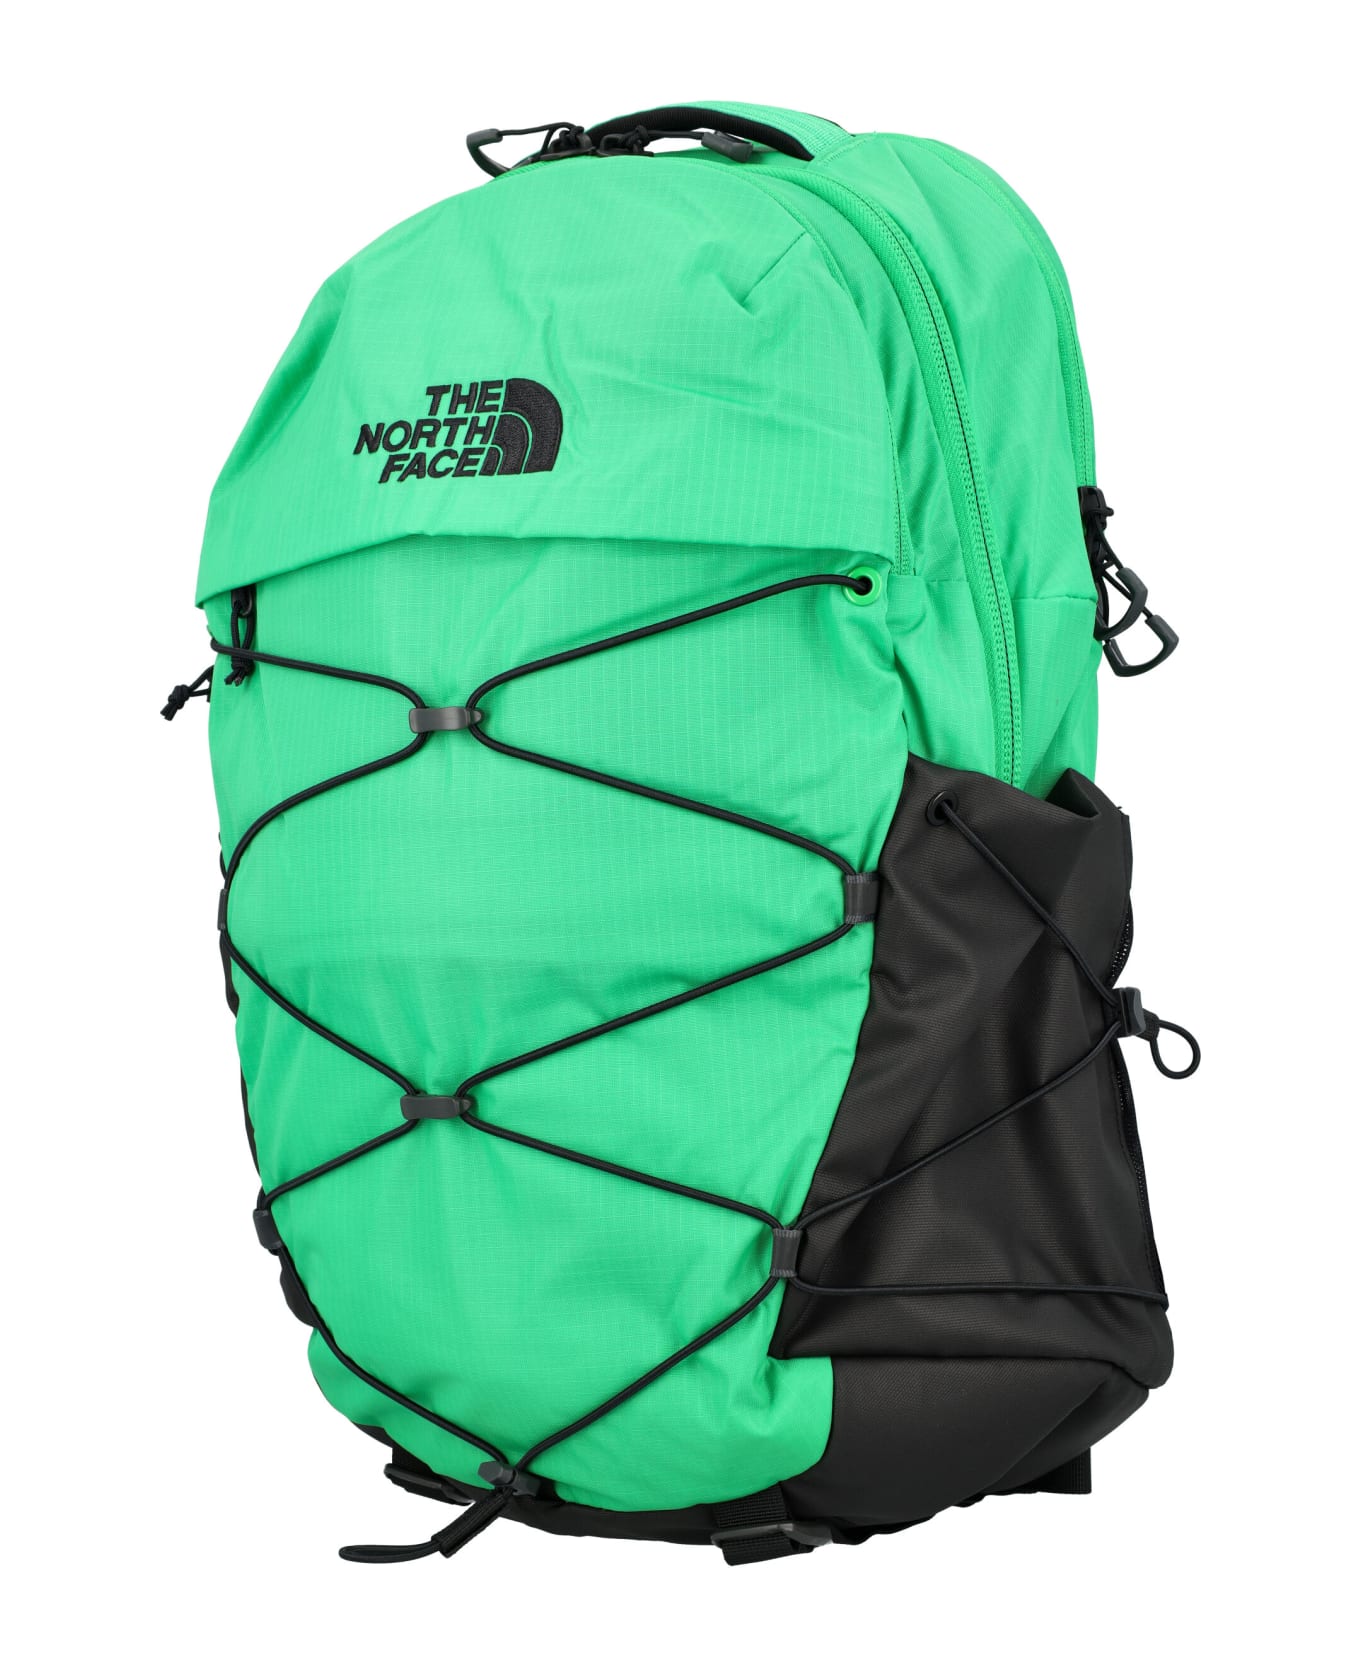 The North Face Borealis Backpack - GREEN バックパック